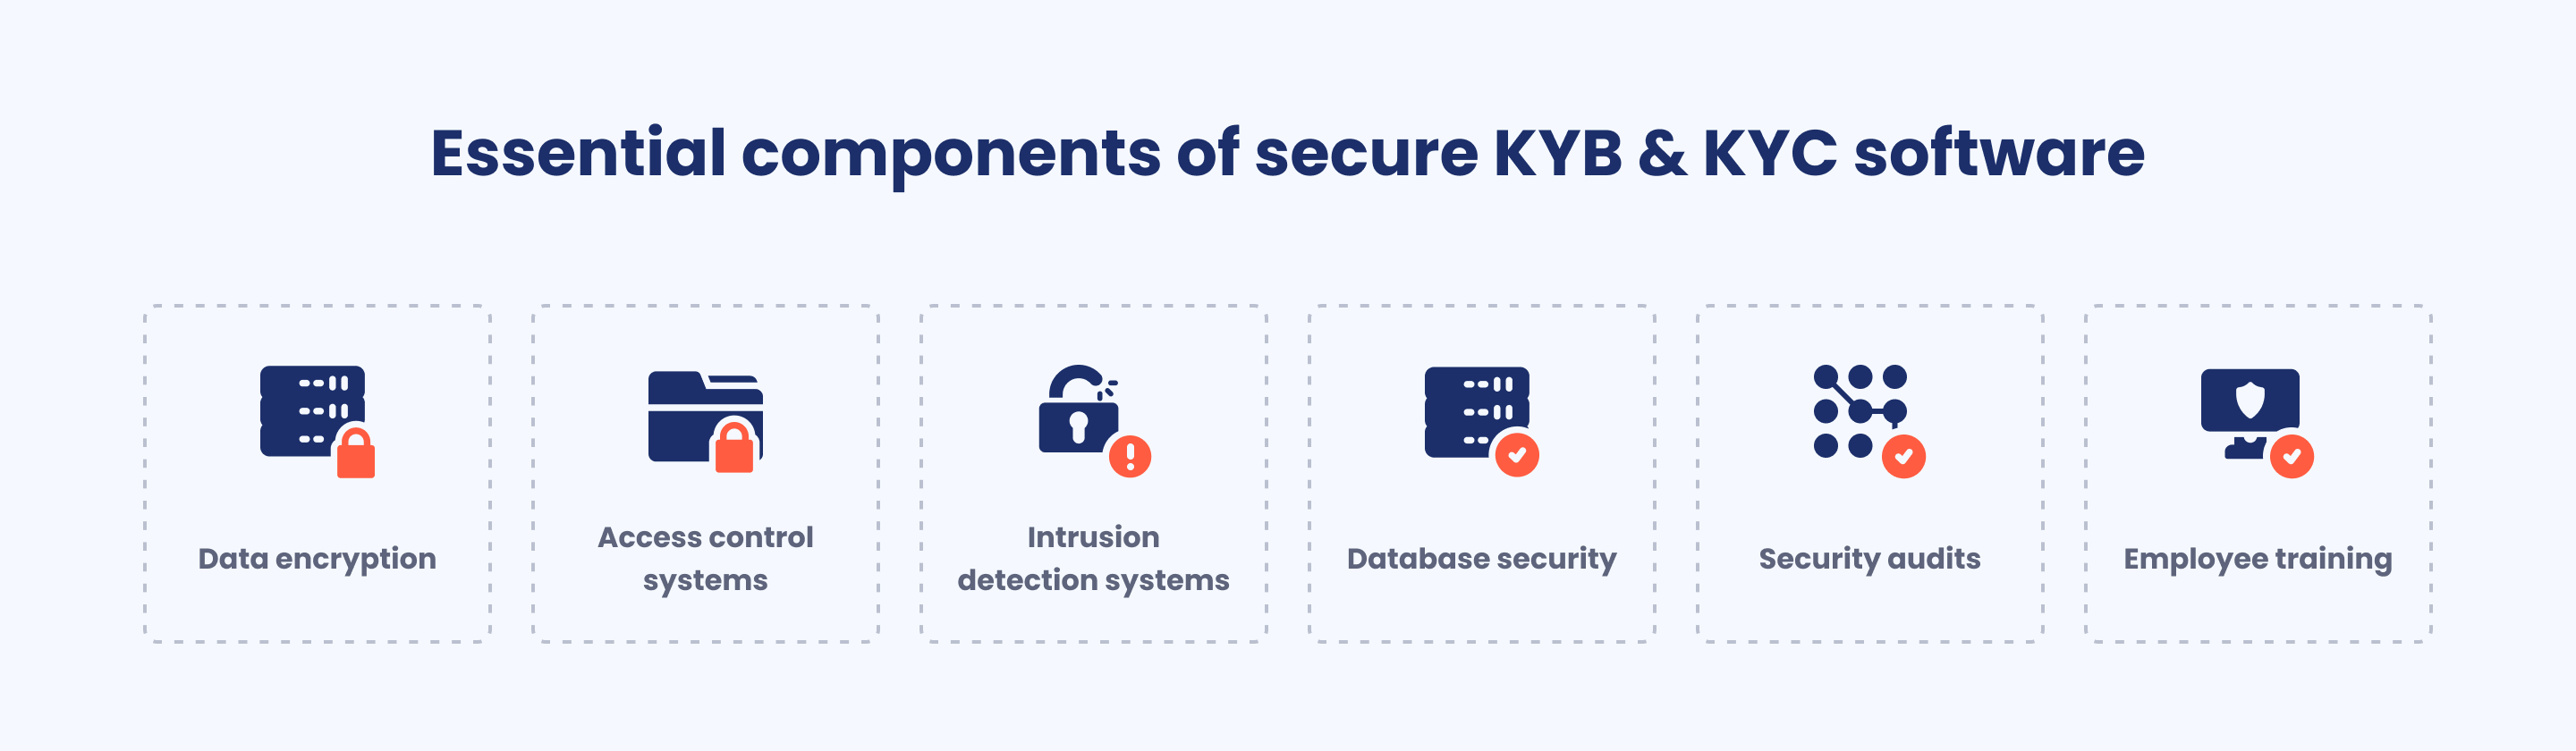 Developing secure KYB & KYC software